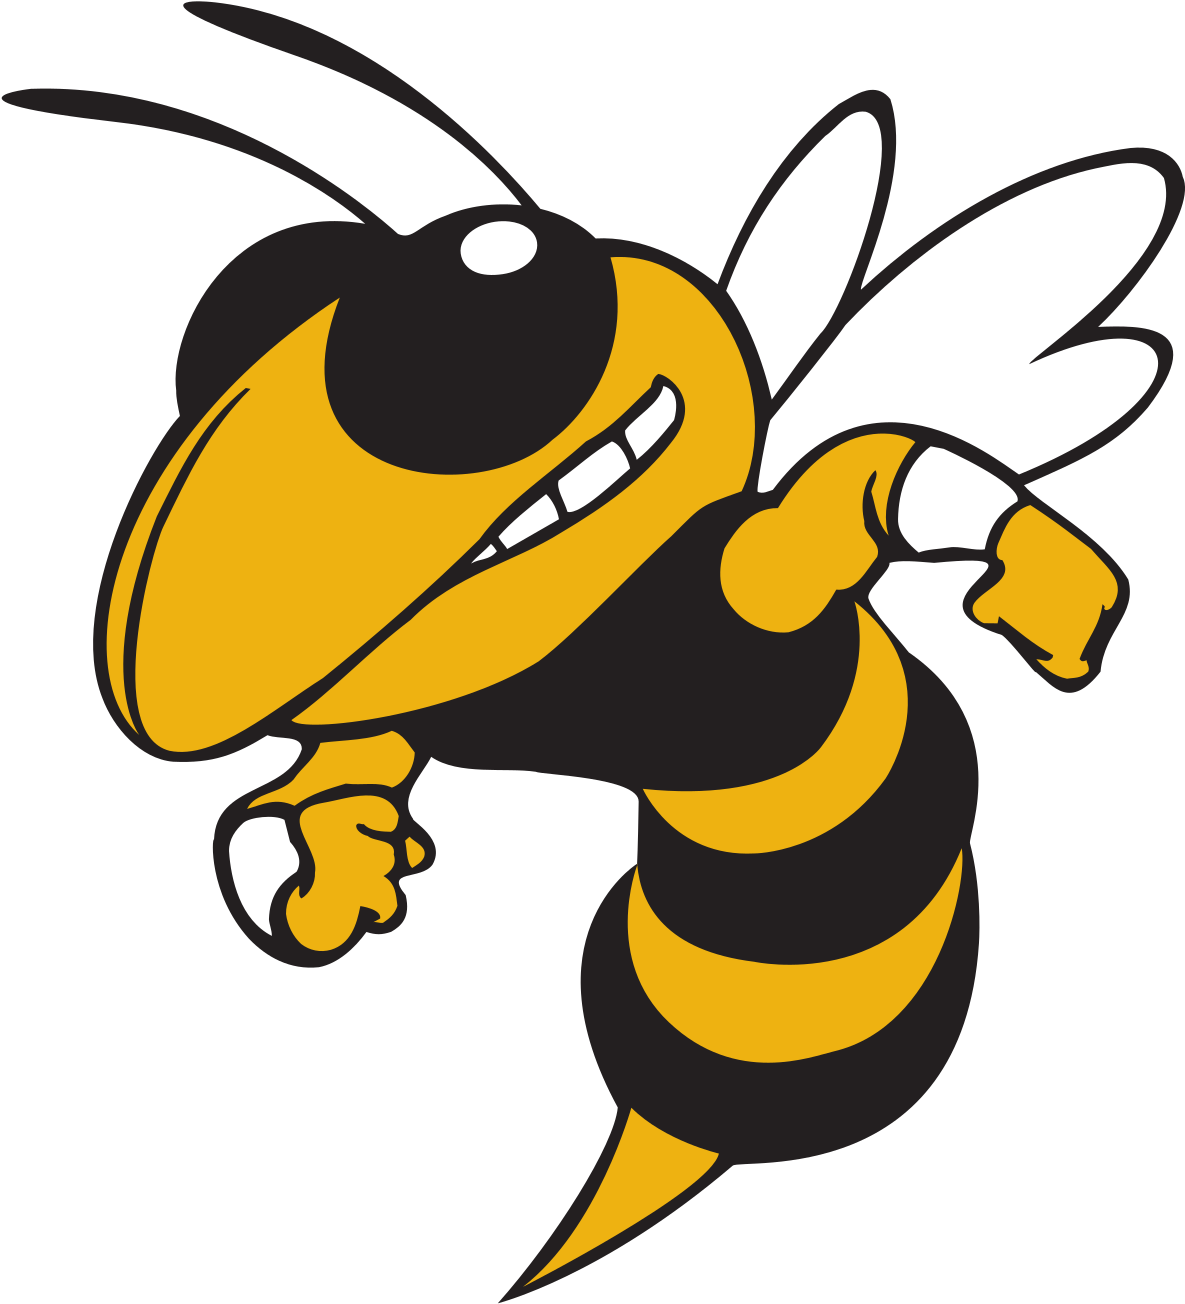 Bee Clipart Bw - Georgia Institute Of Technology (1200x1325)